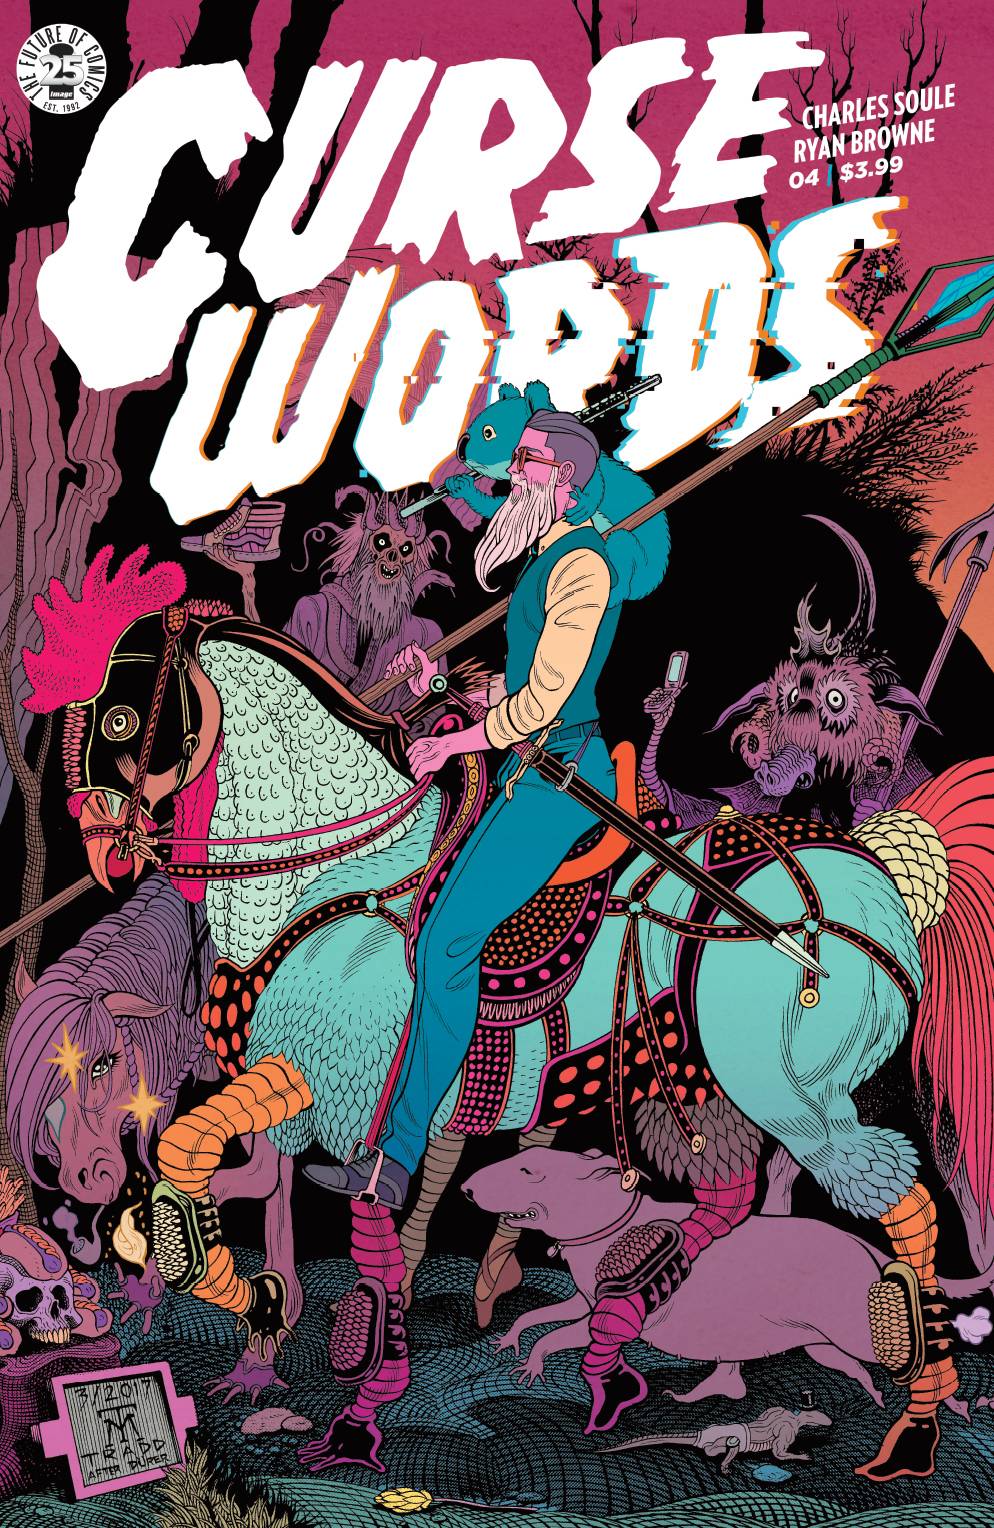 Curse Words #4 Cover B Moore